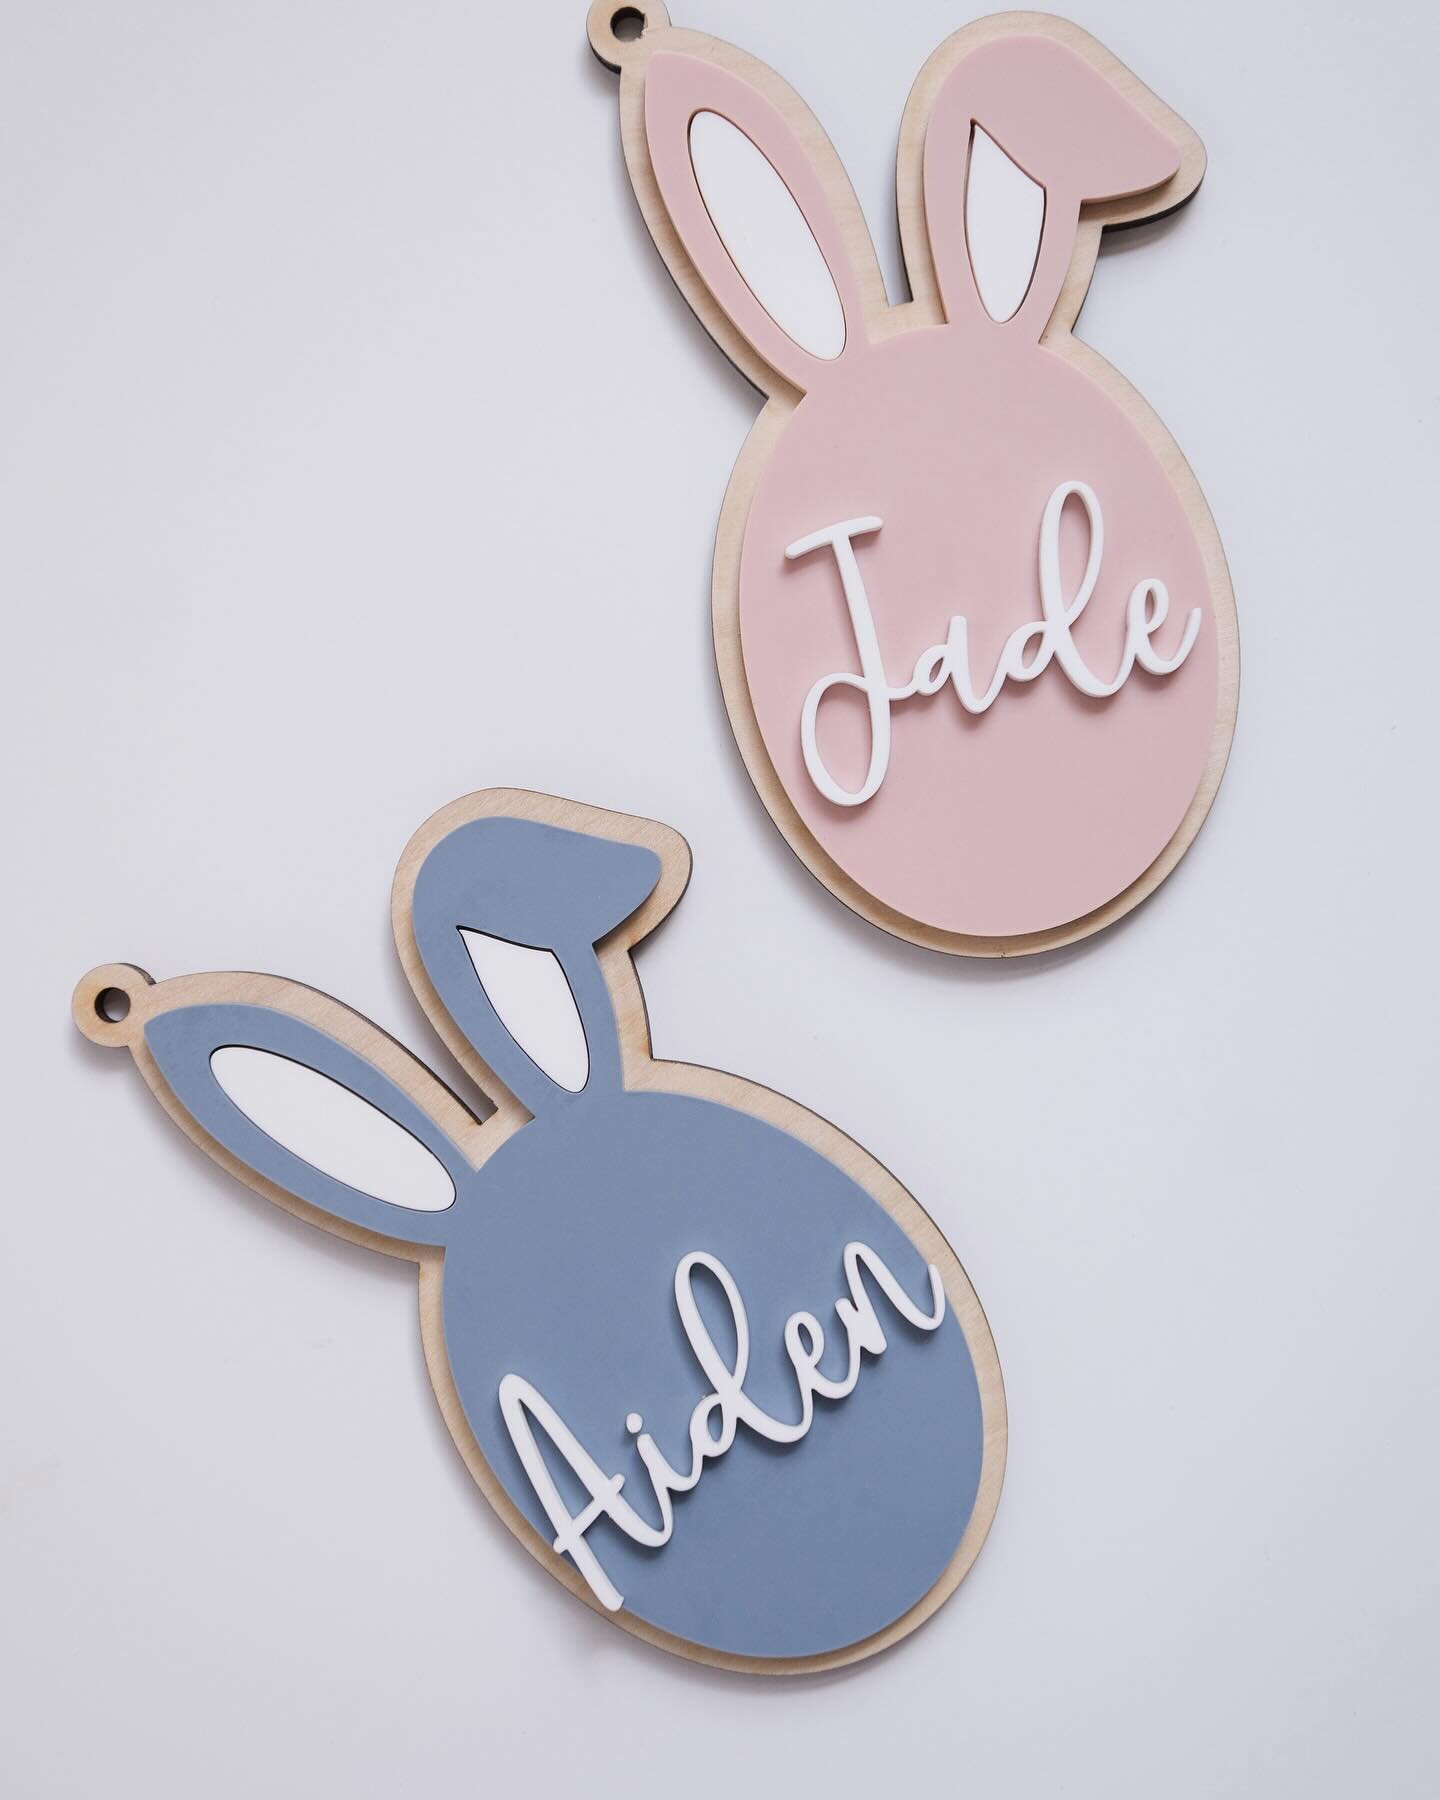 Have you hopped on over to our site to check out the new Easter items? Like these cutie little acrylic + wood bunnies 🐰🐰

Product photo by @stewartimagery 

#easter #easterdecor #easterbasket #lasercutting #lasermade #thatsdarling #acrylicsignage